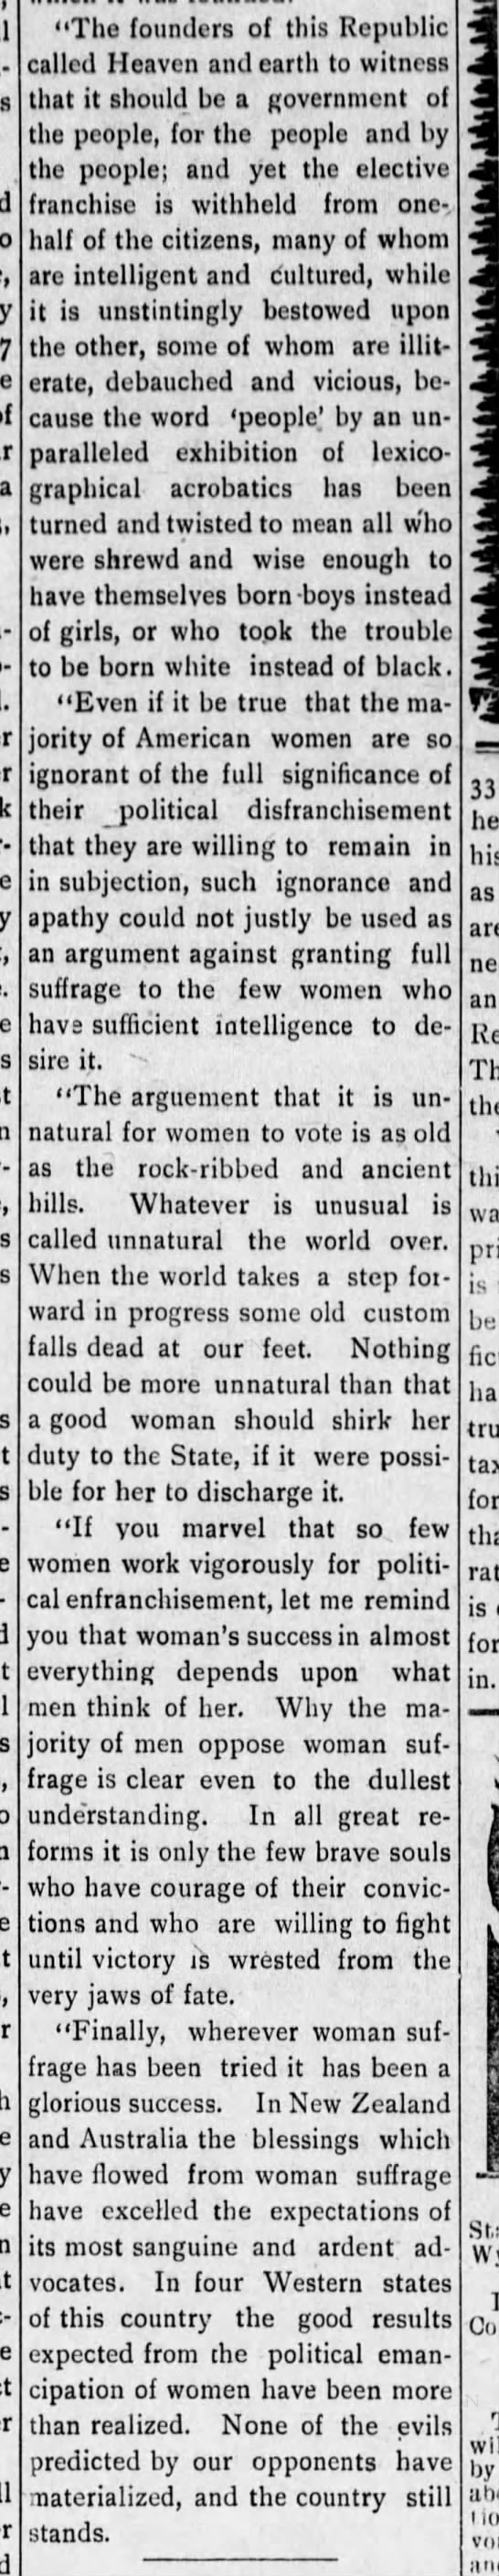 Excerpt from Mary Church Terrell's address "The Justice of Woman Suffrage" - 